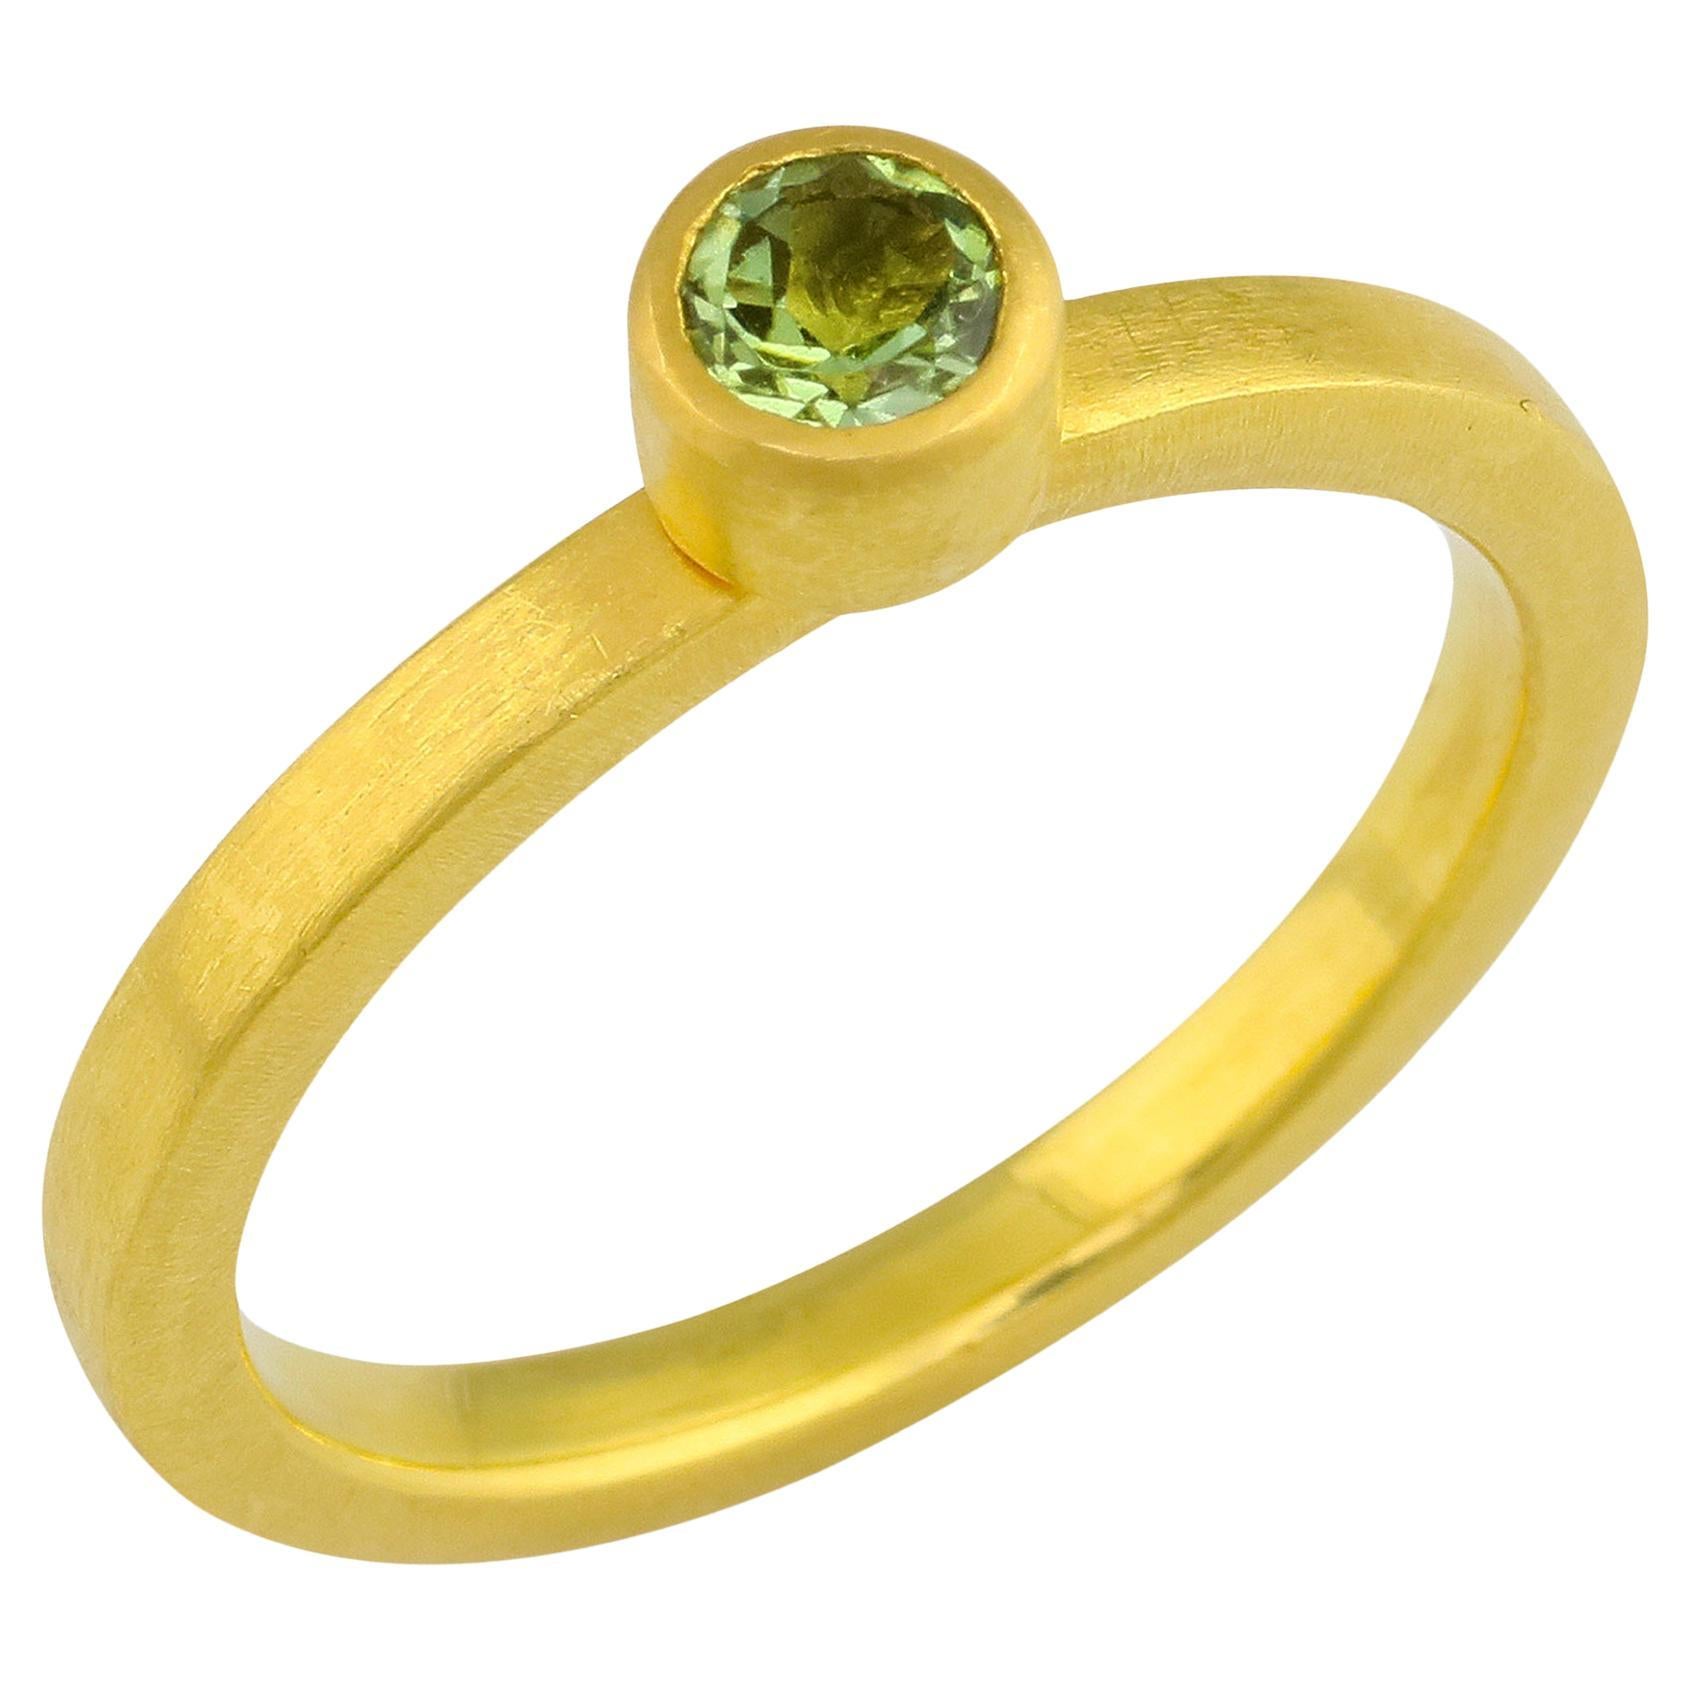 PHILIPPE SPENCER .28 Ct. Green Tourmaline in 22K and 20K Gold Solitaire Ring For Sale